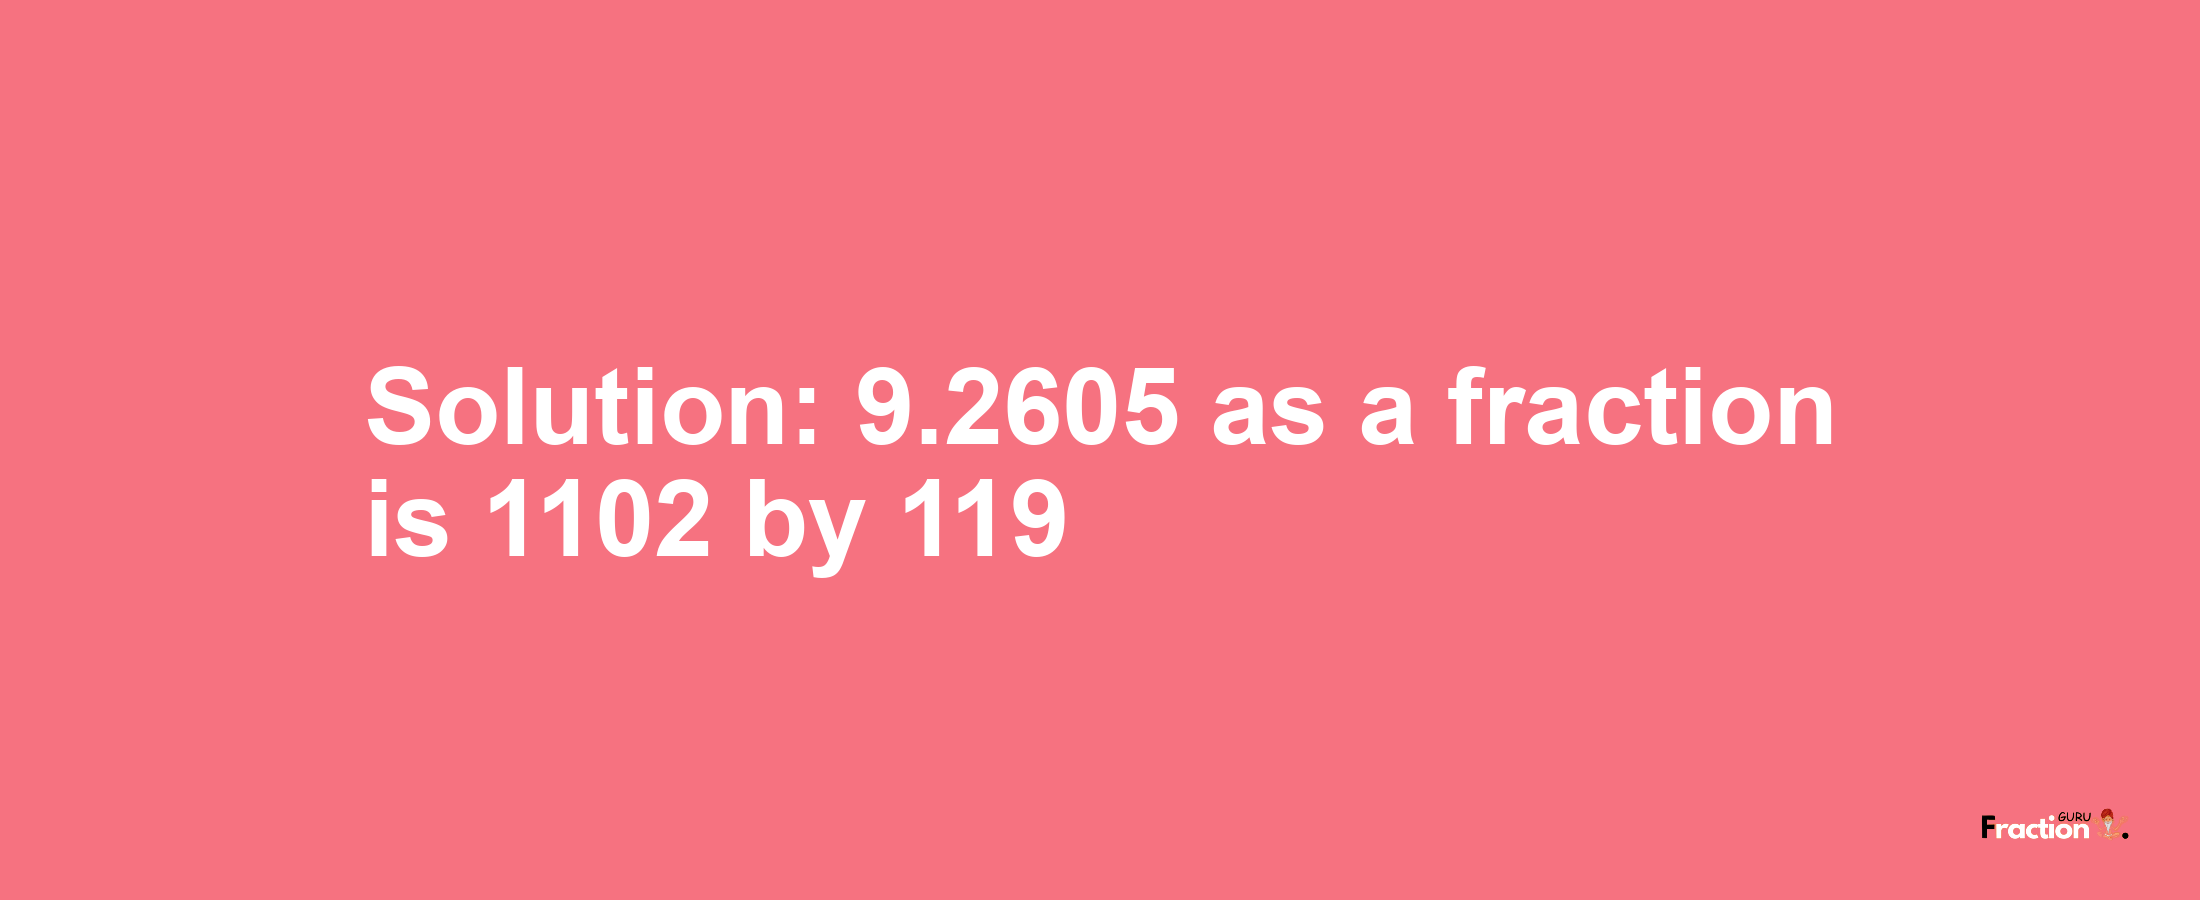 Solution:9.2605 as a fraction is 1102/119